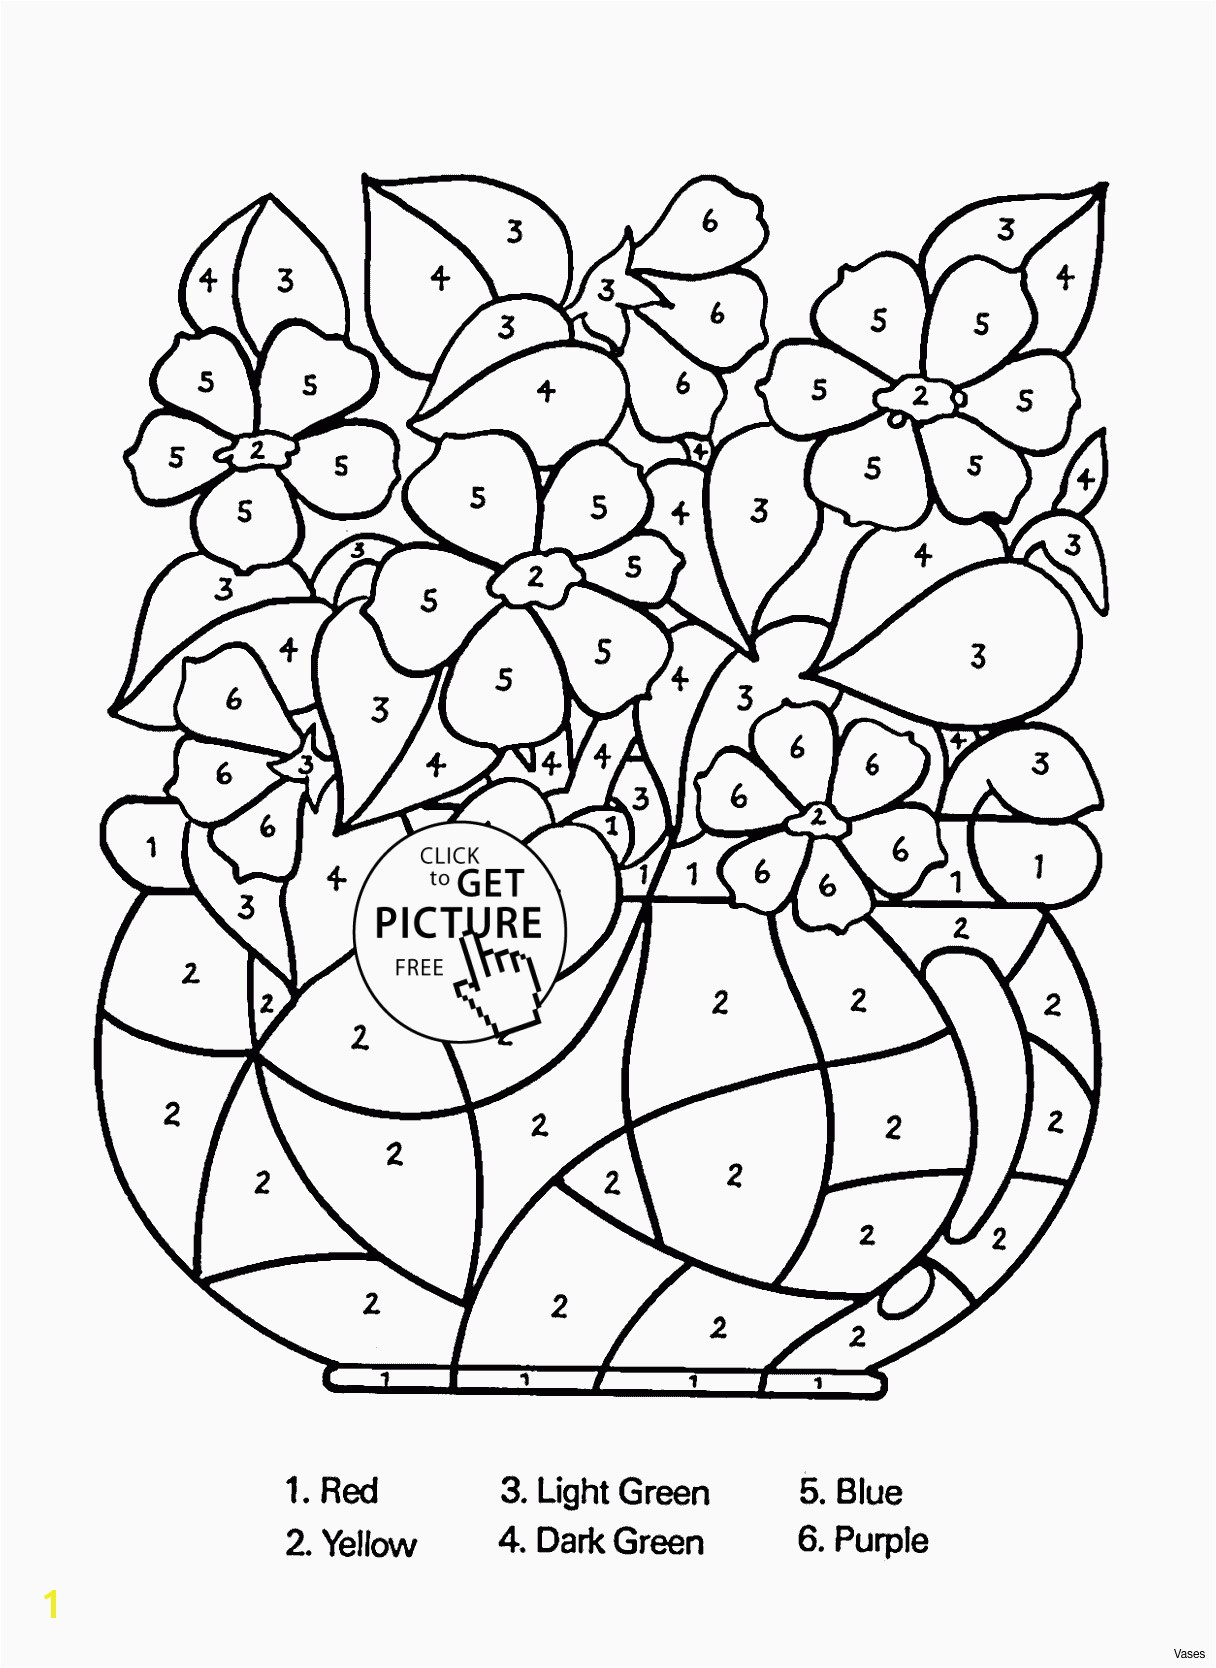 Chanuka Coloring Pages Best Letter Coloring Sheet Design